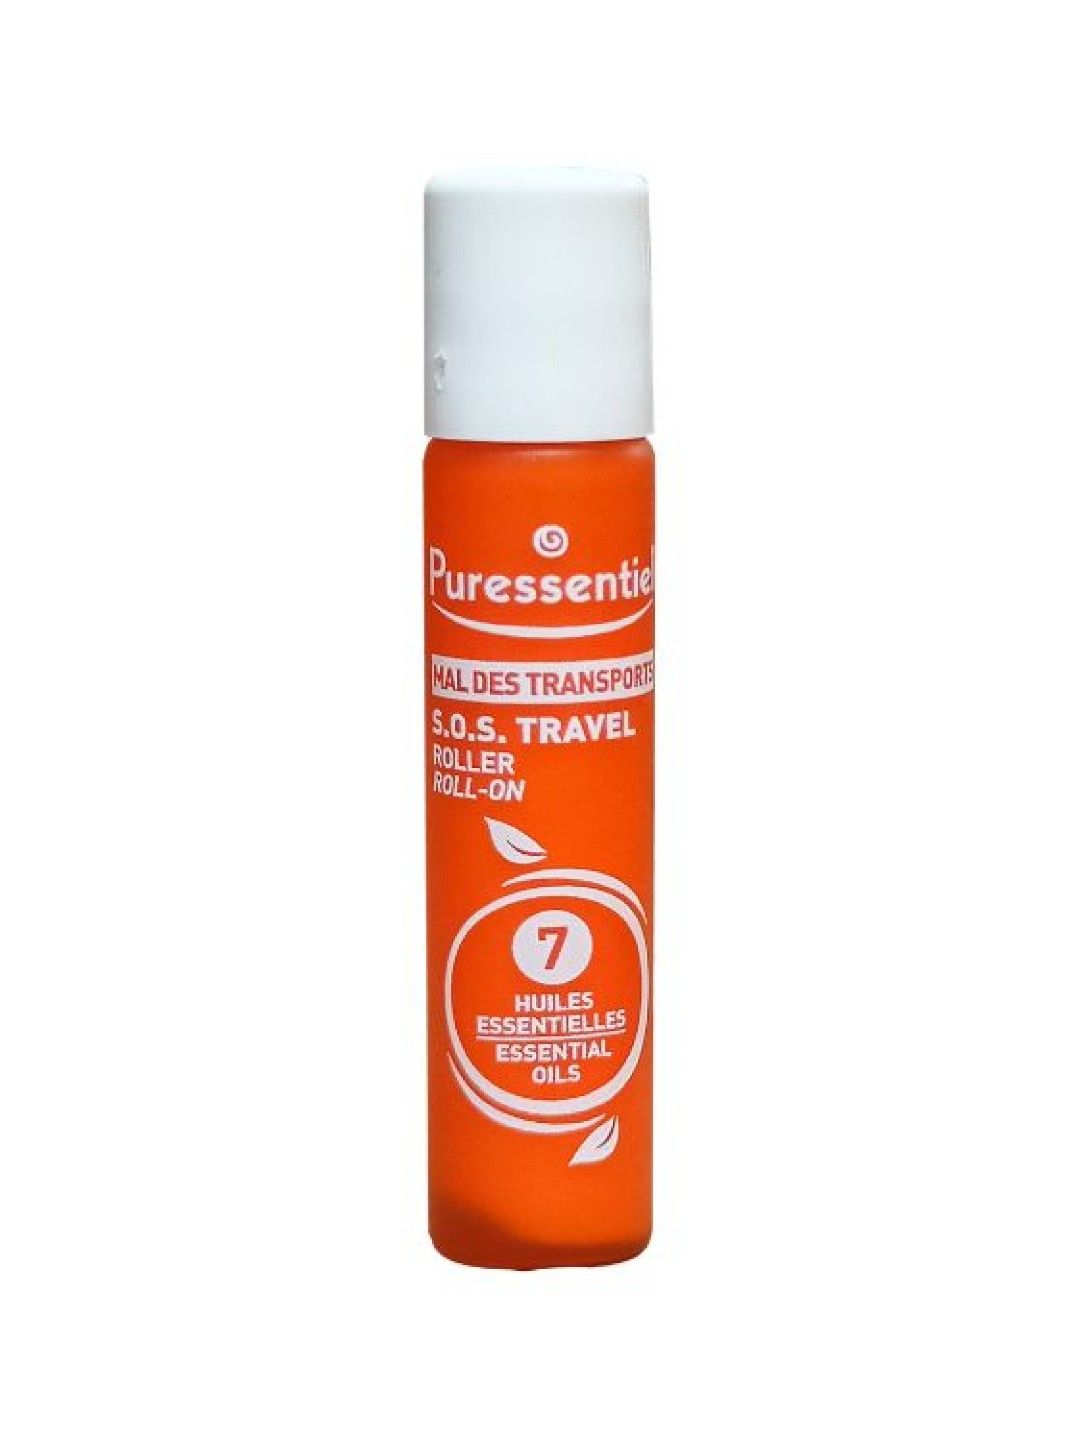 Puressentiel Well Being SOS Travel Roll-on